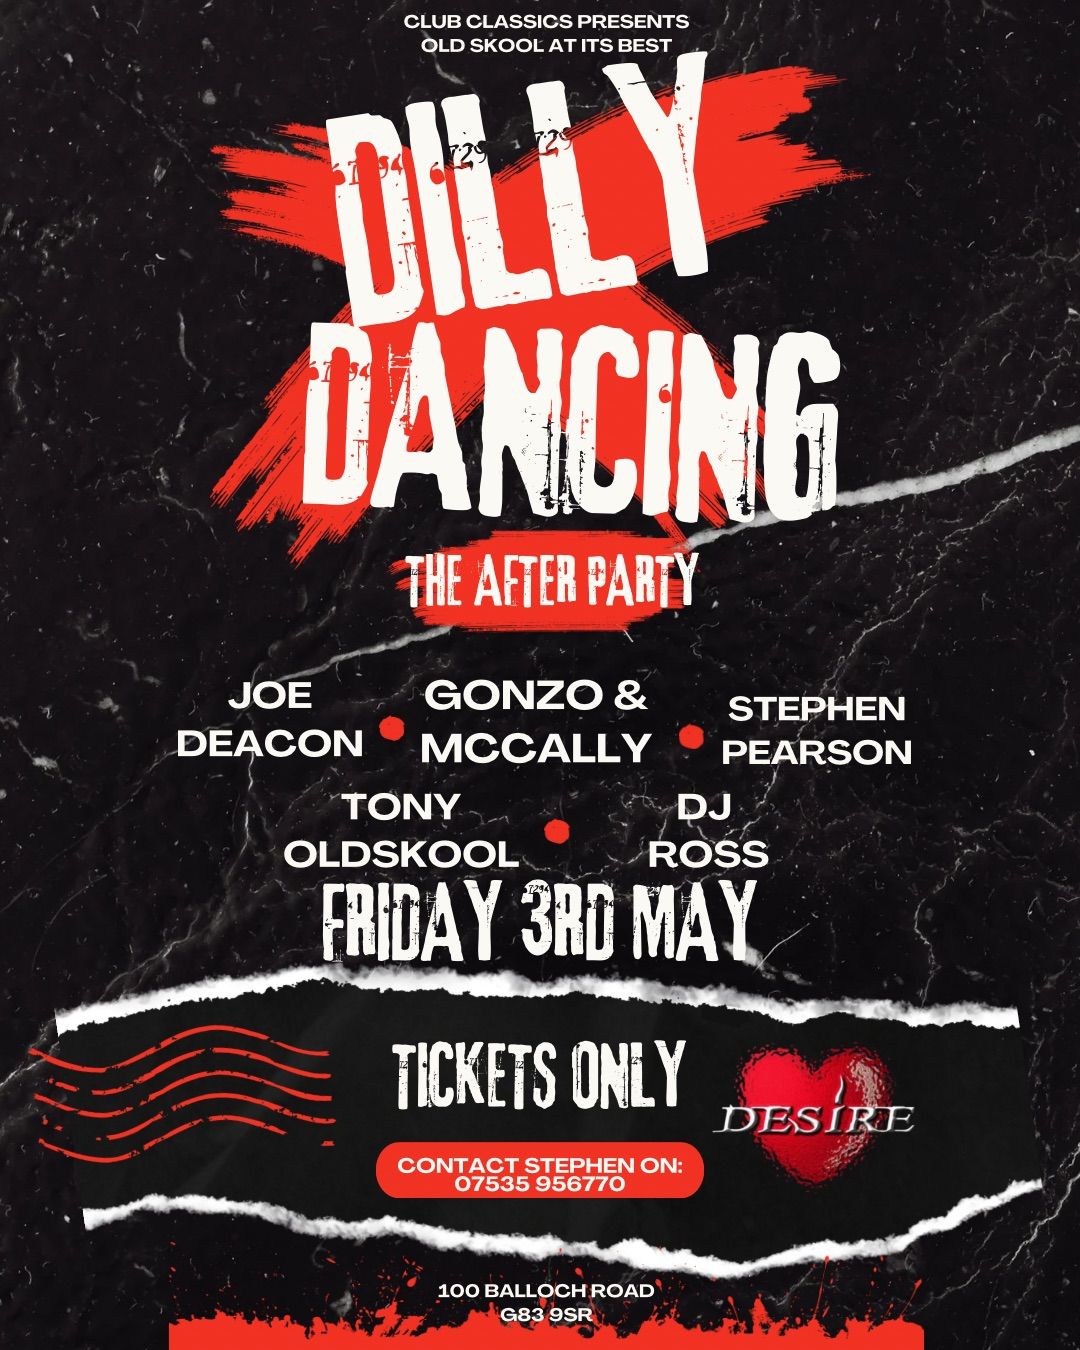 Dilly Dancing - The After Party